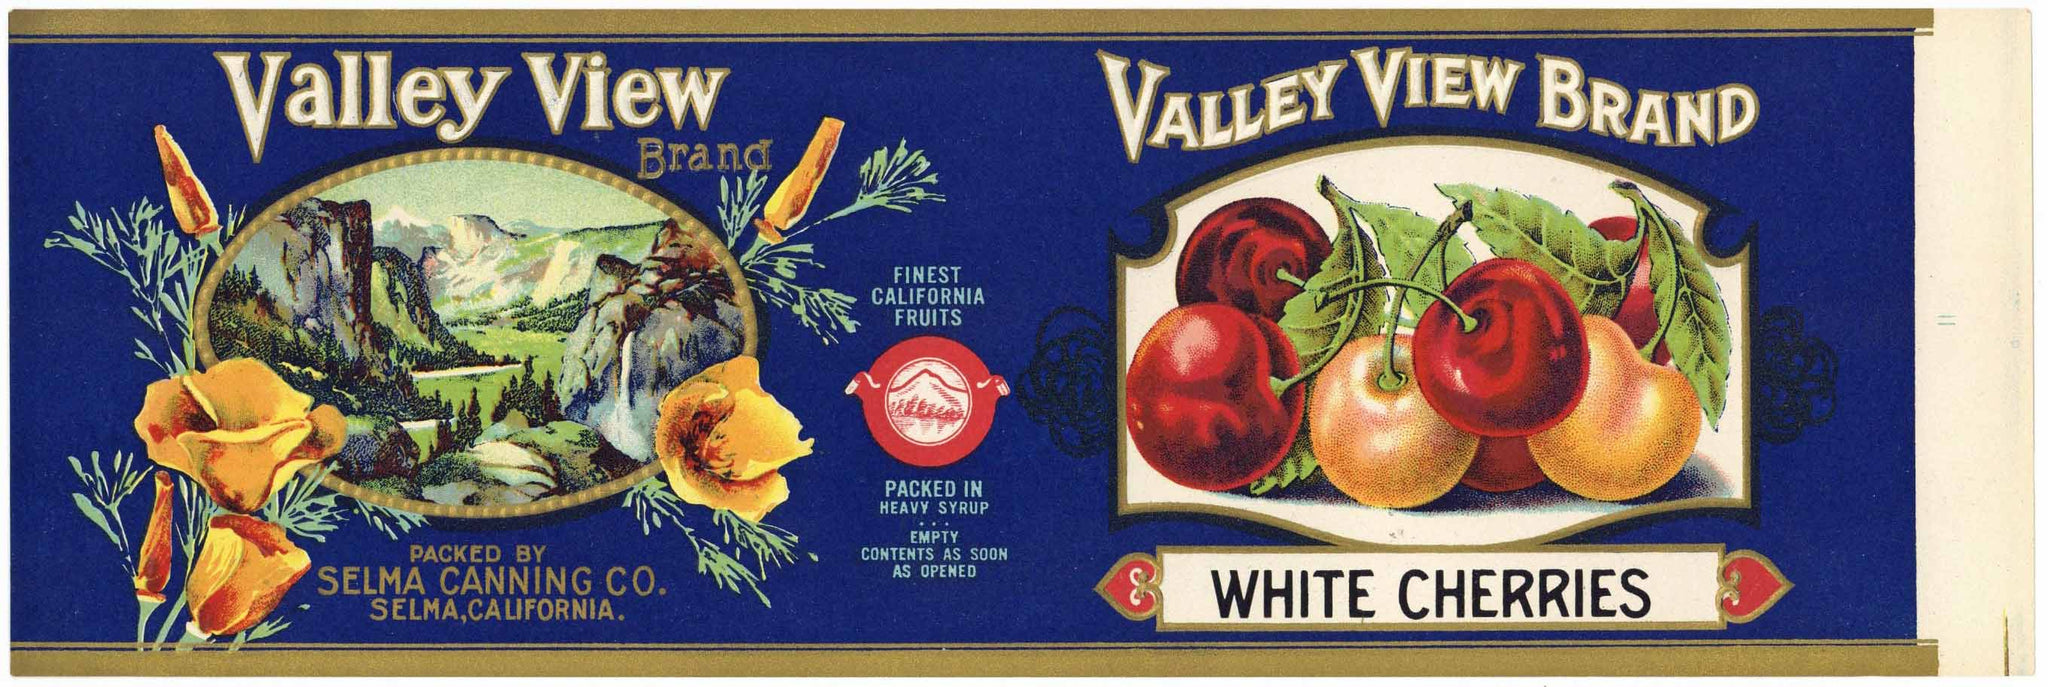 Valley View Brand Vintage Cherry Can Label